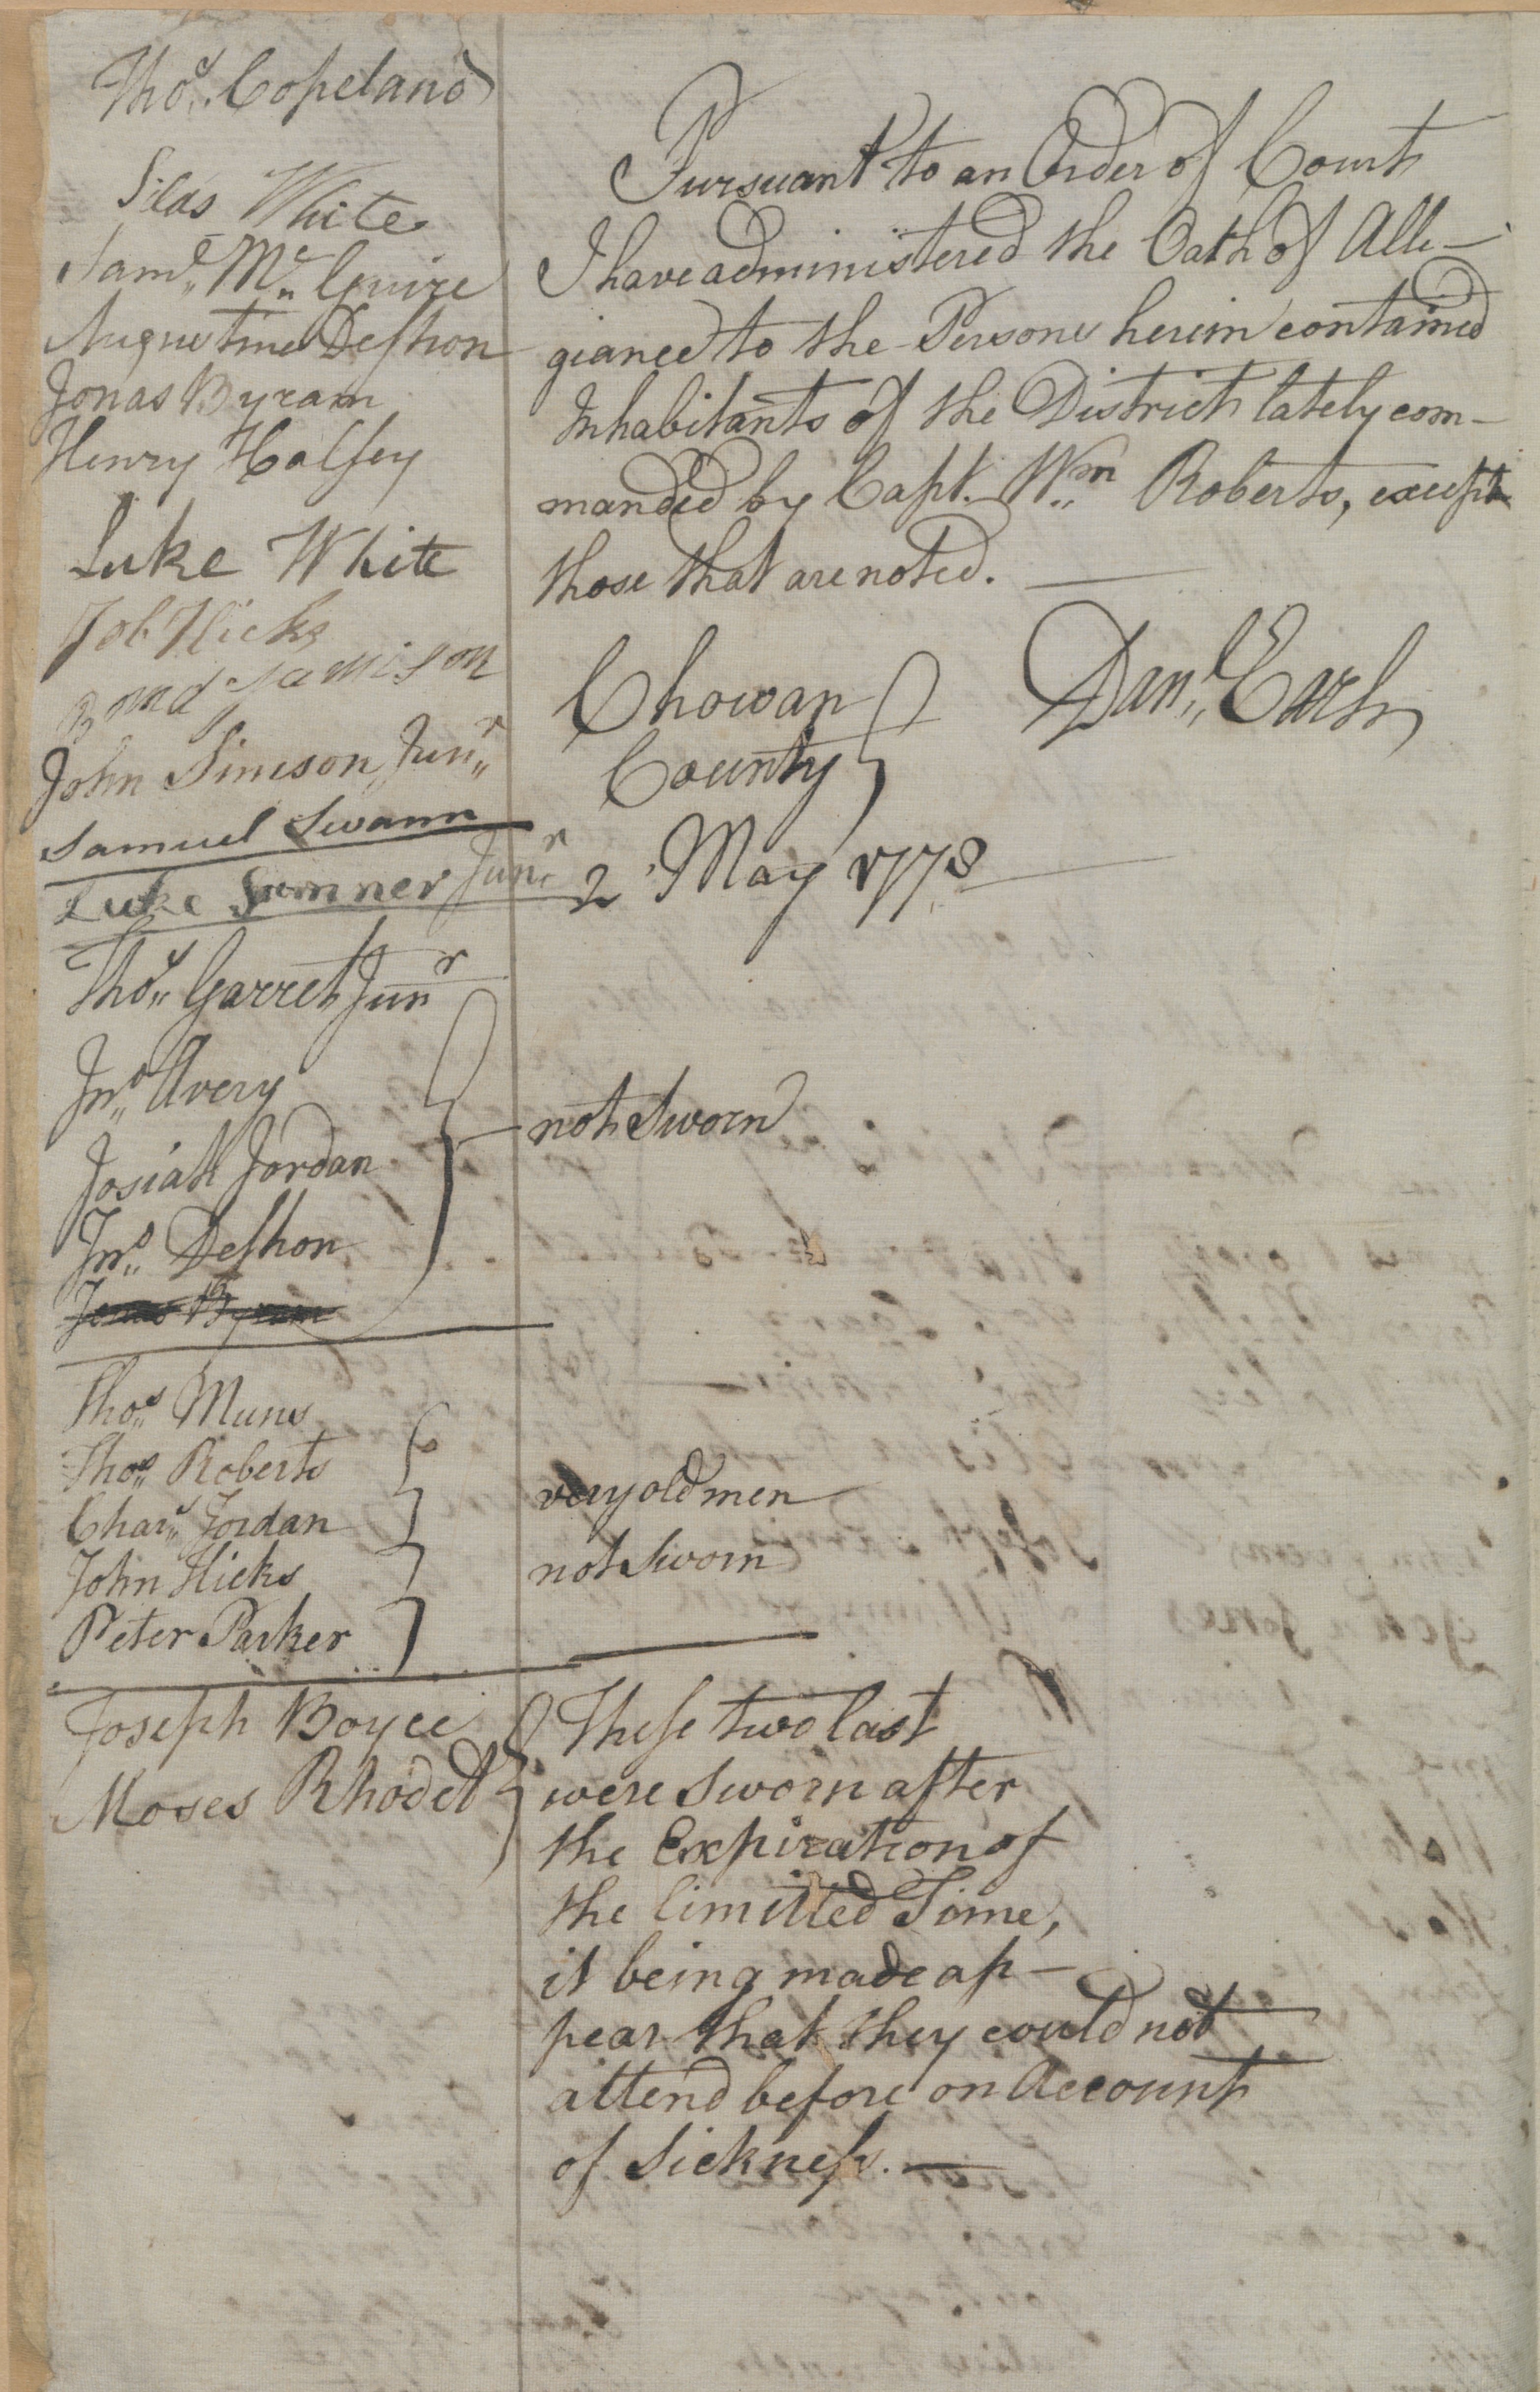 List of People Swearing and Refusing the Oath of Allegiance in Chowan County, 2 May 1778, page 2